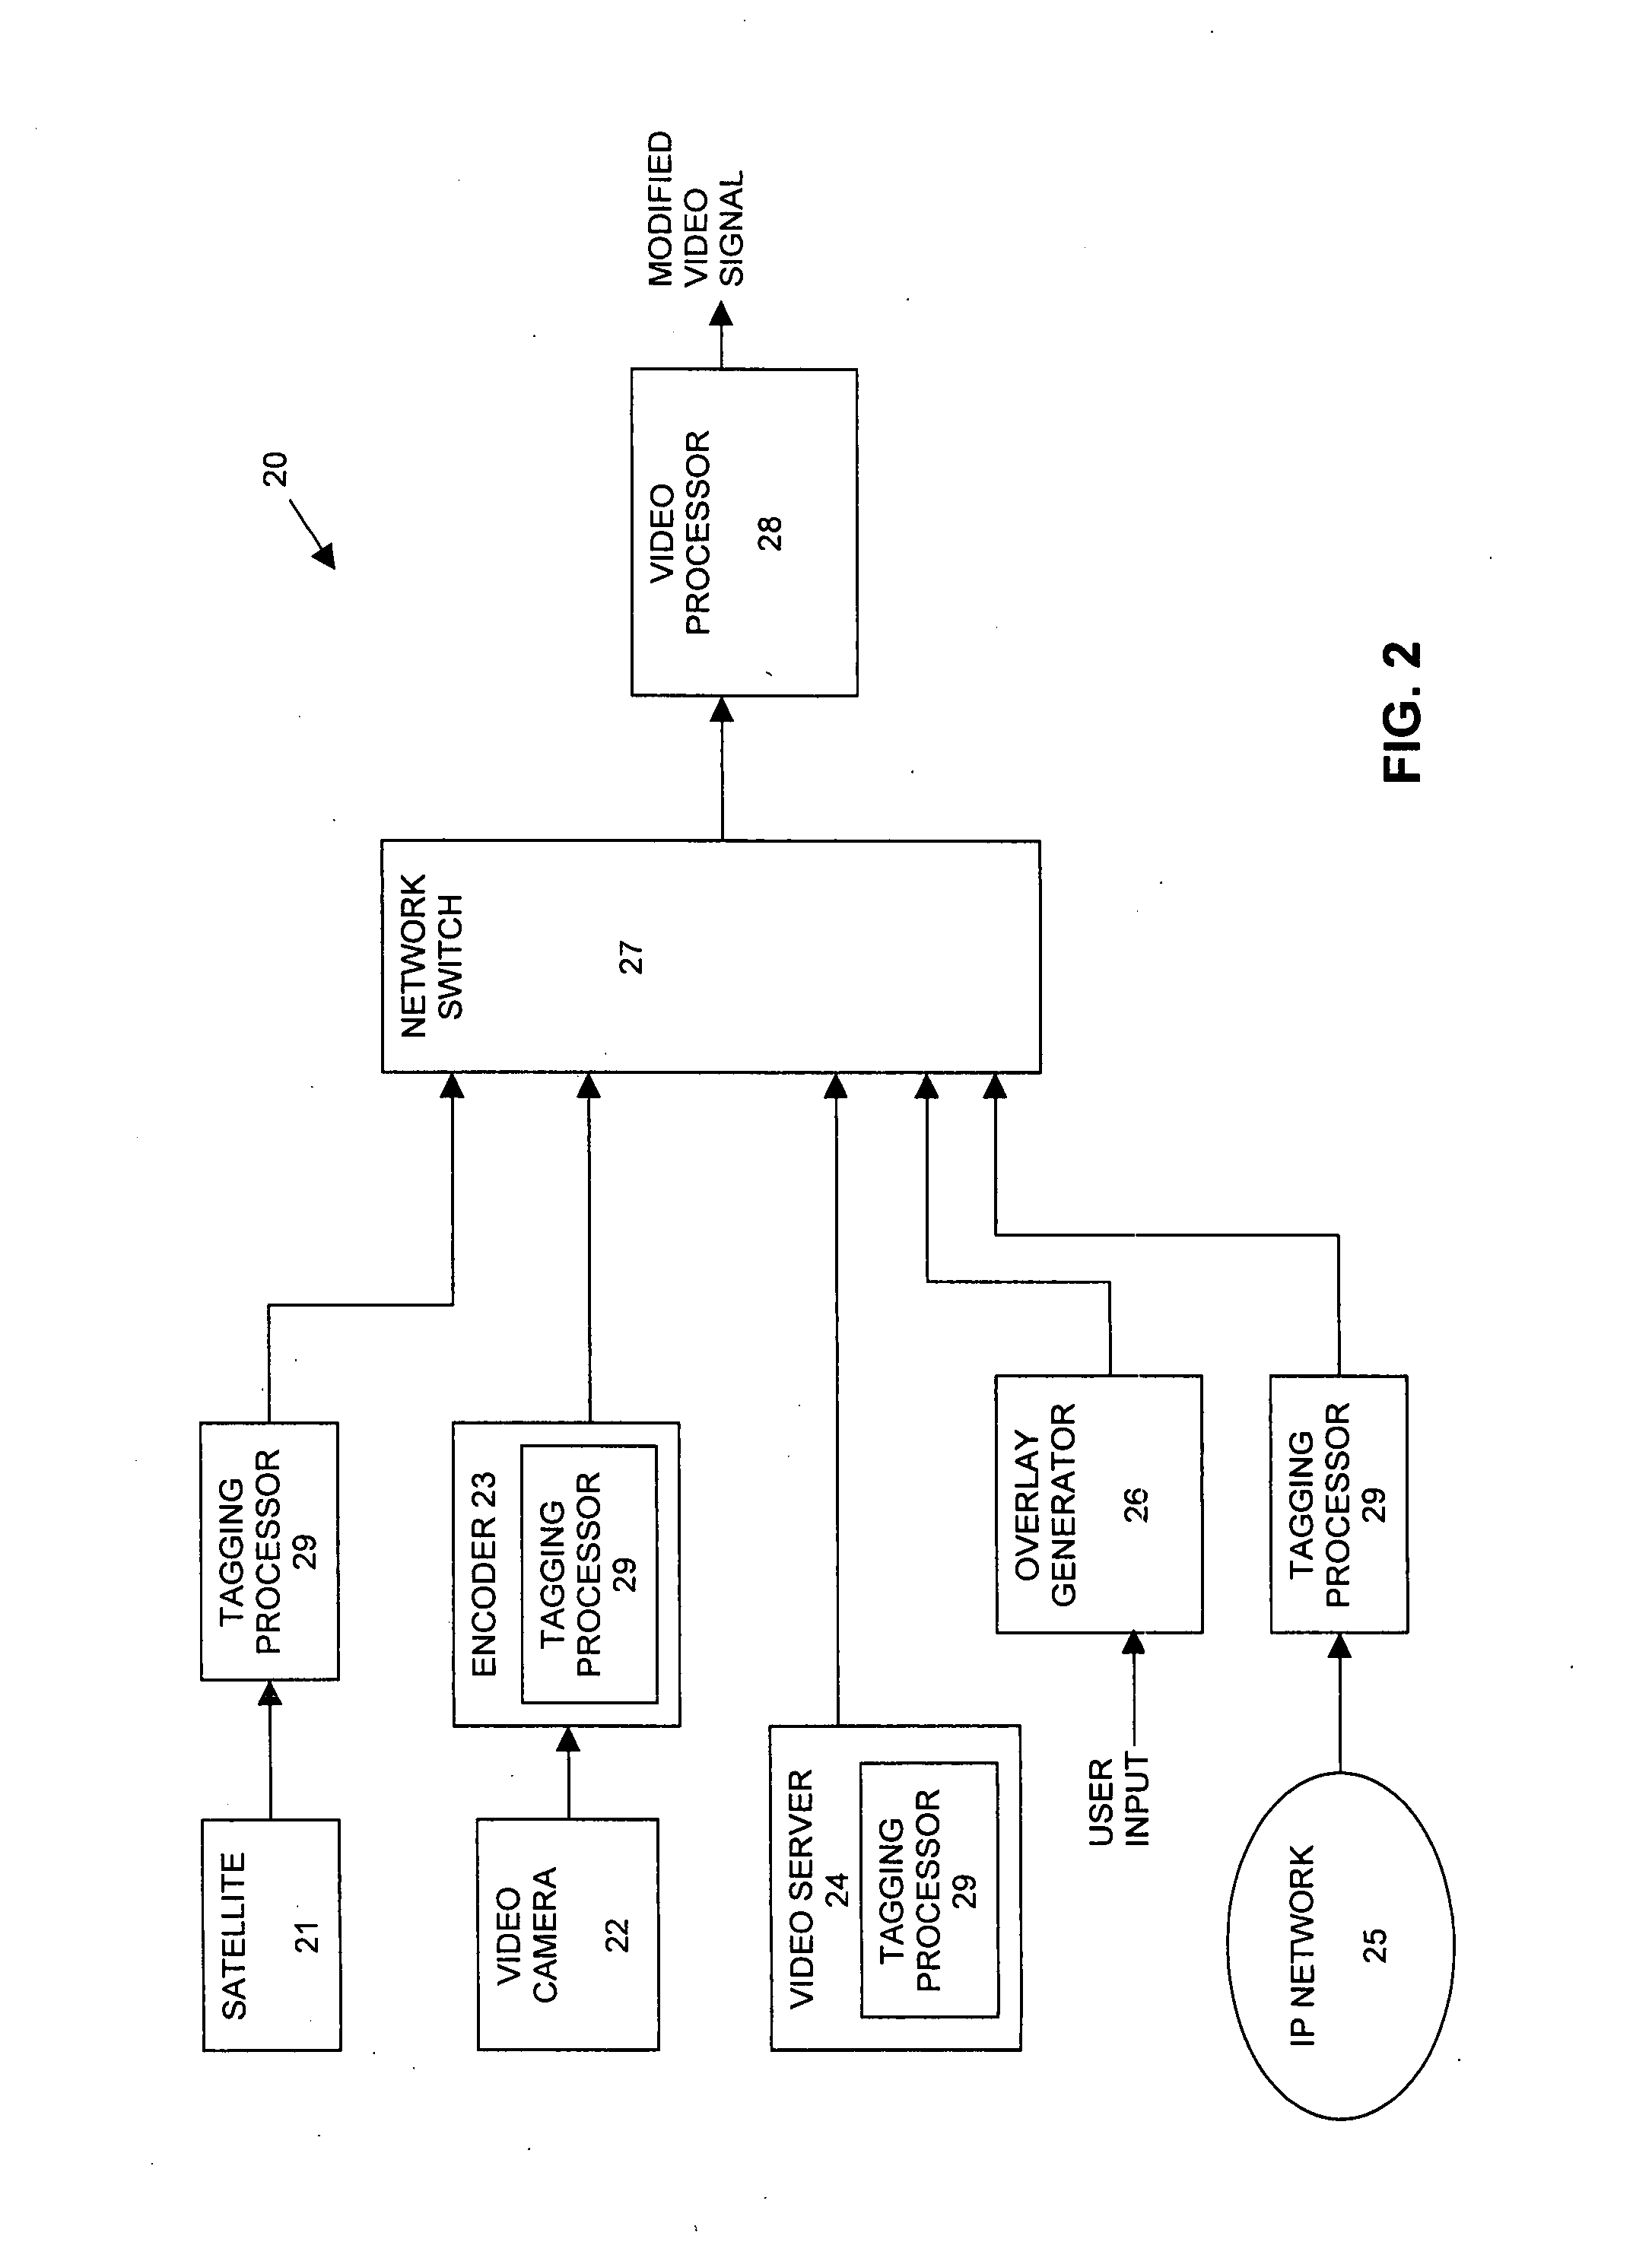 Methods, apparatus, and systems for insertion of overlay content into a video signal with transrating capabilities